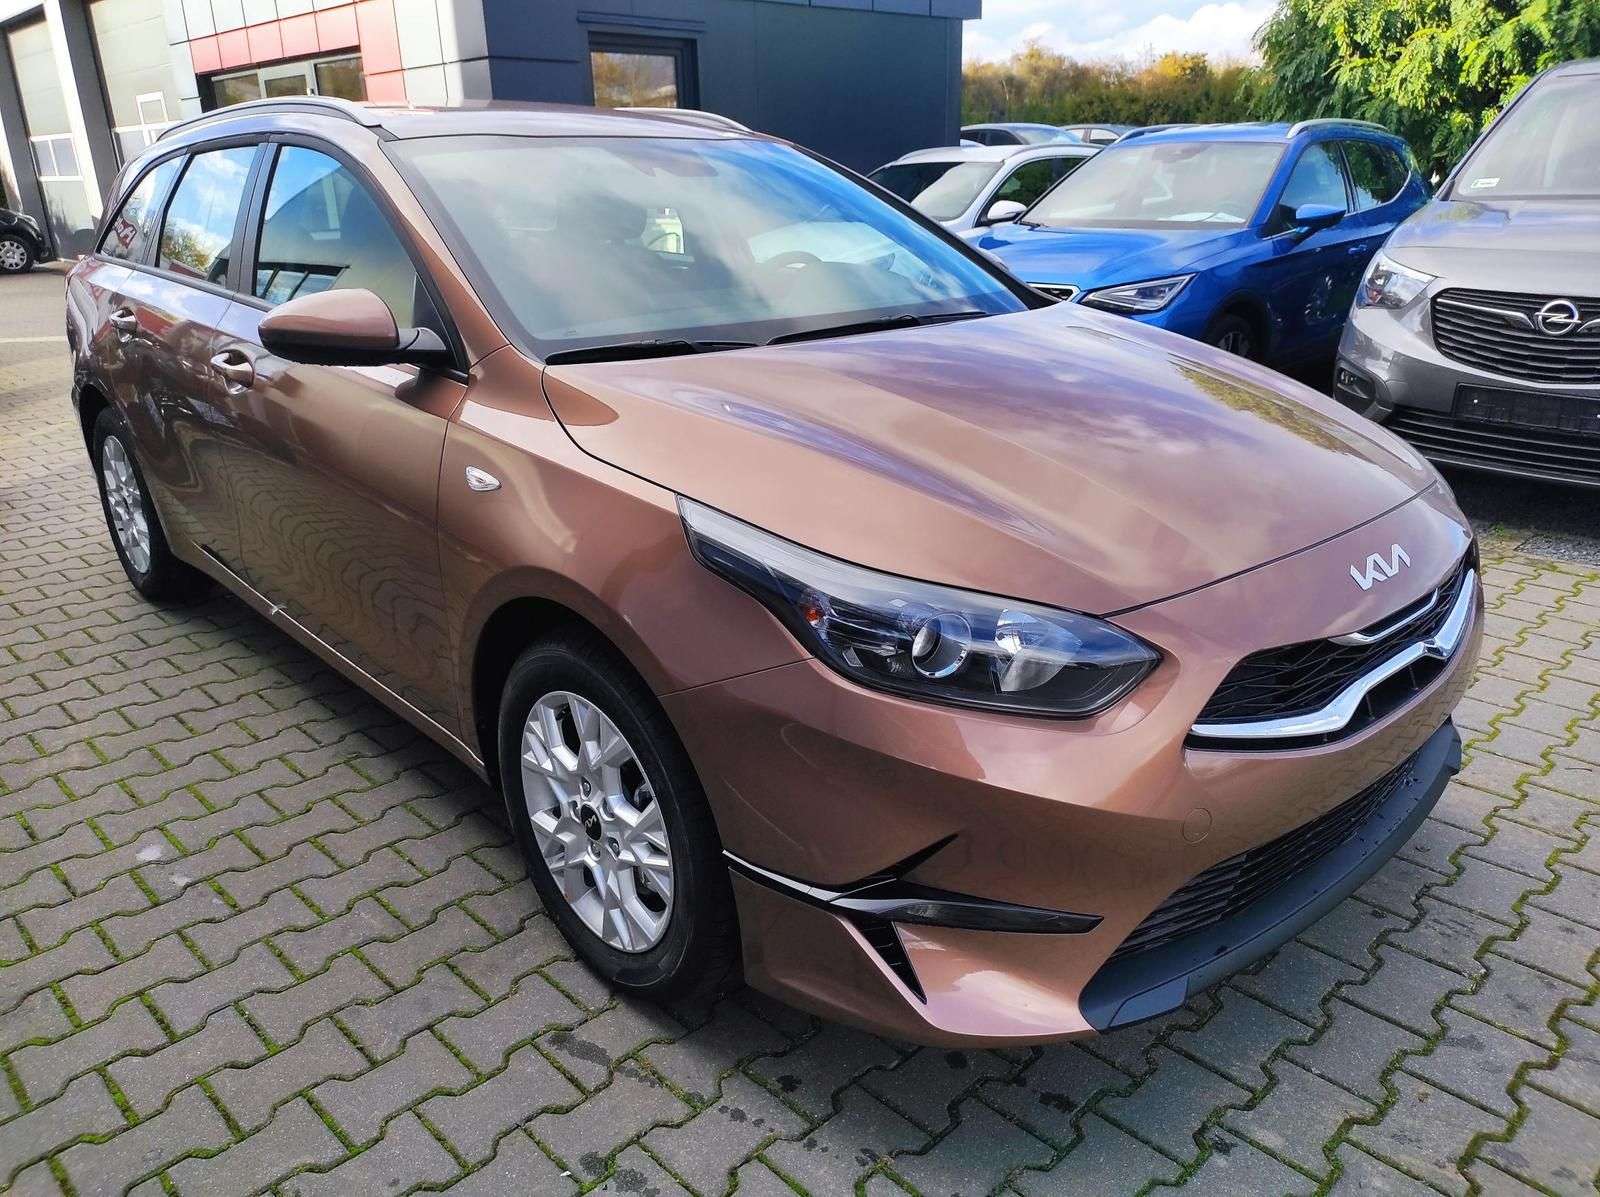 Kia Ceed SW / cee'd SW Station wagon in Brown used in Polch for € 21,990.-